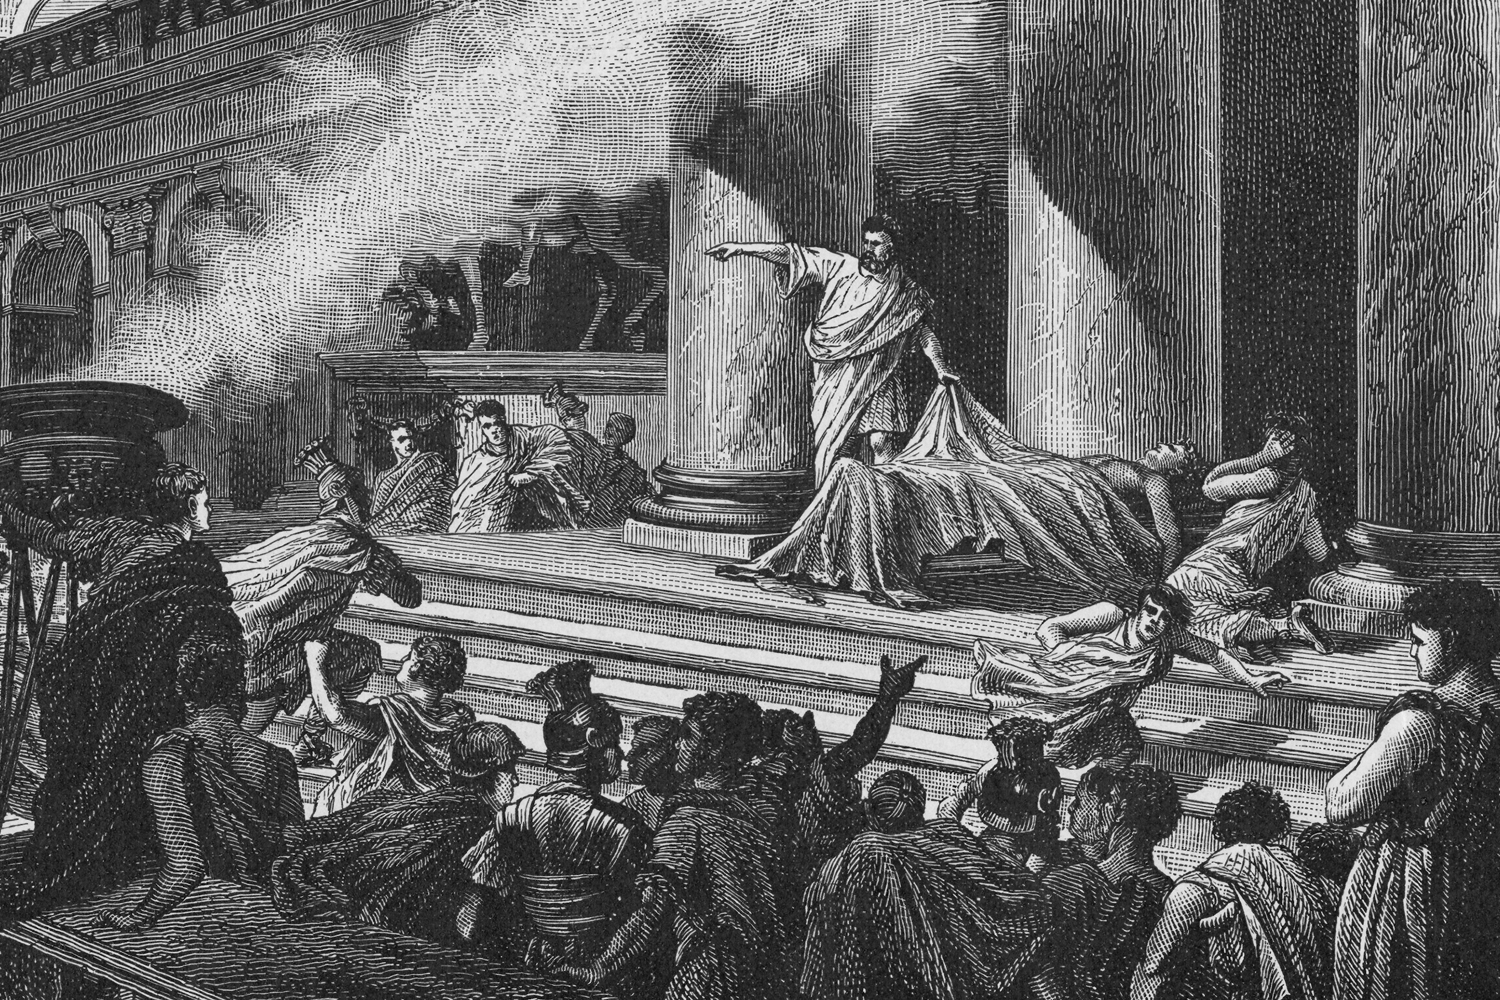 An artist's depiction of Mark Antony's funeral oration for Caesar.